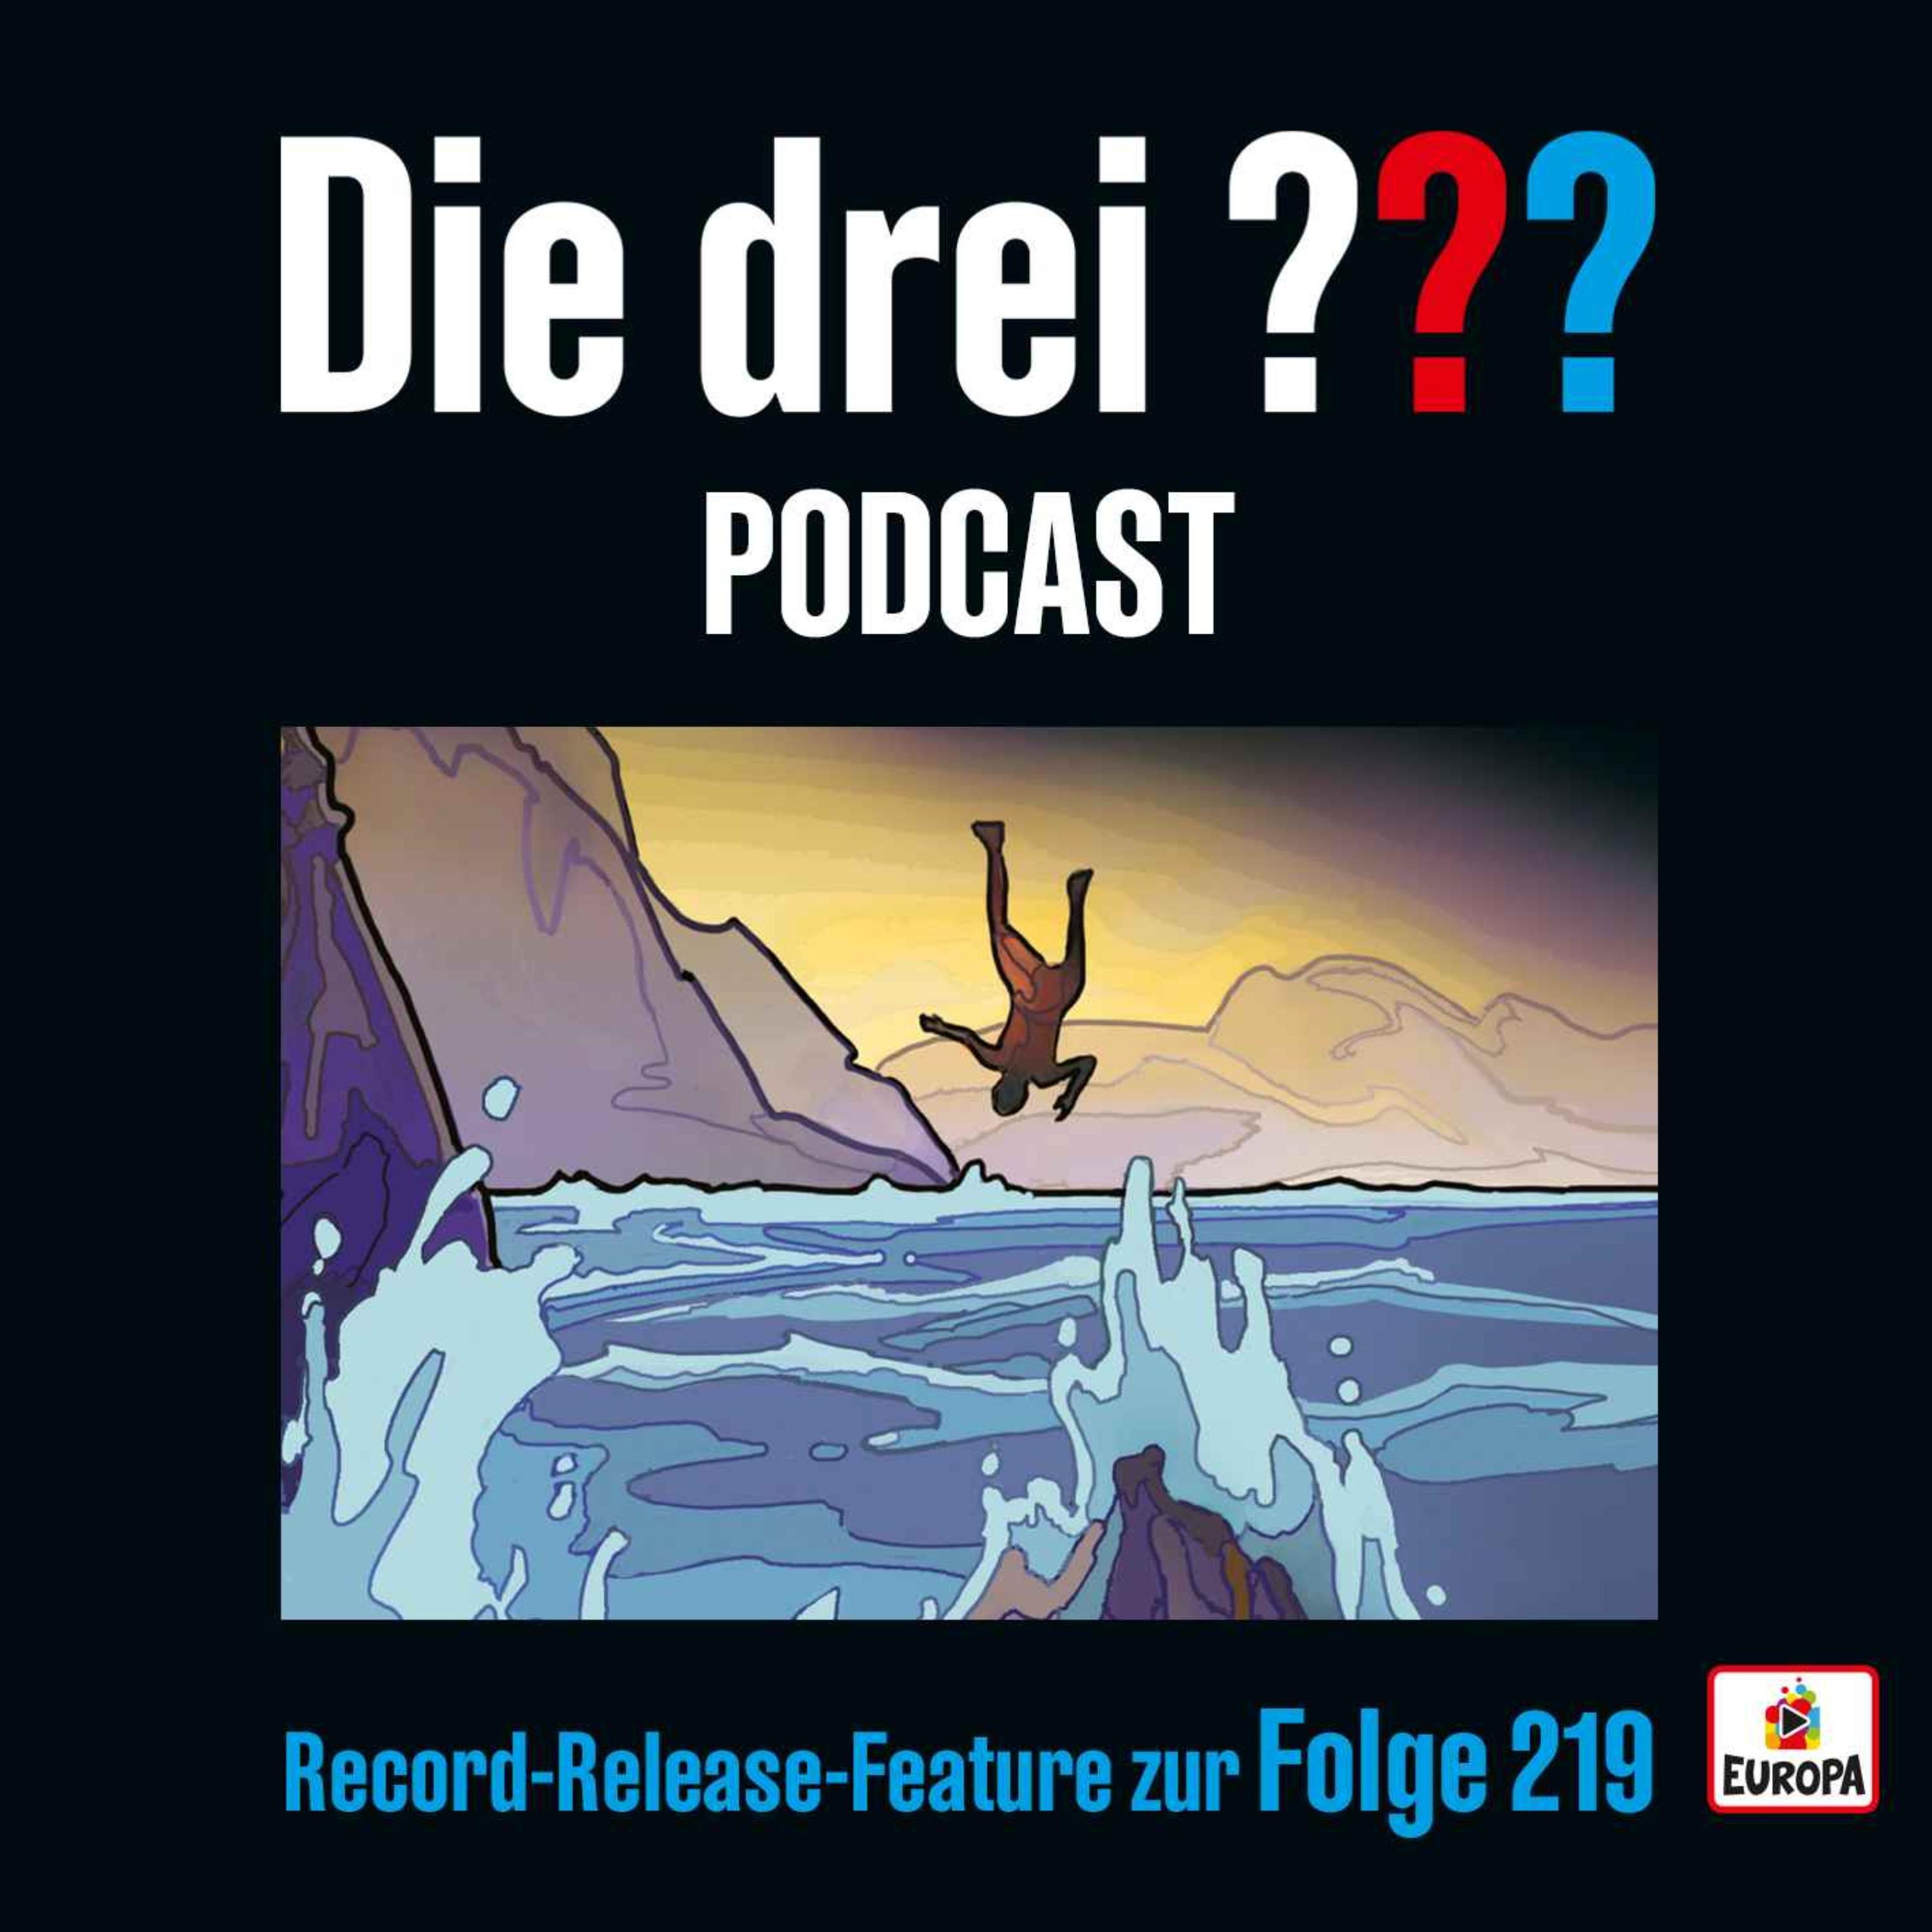 Record-Release-Feature zur Folge 219